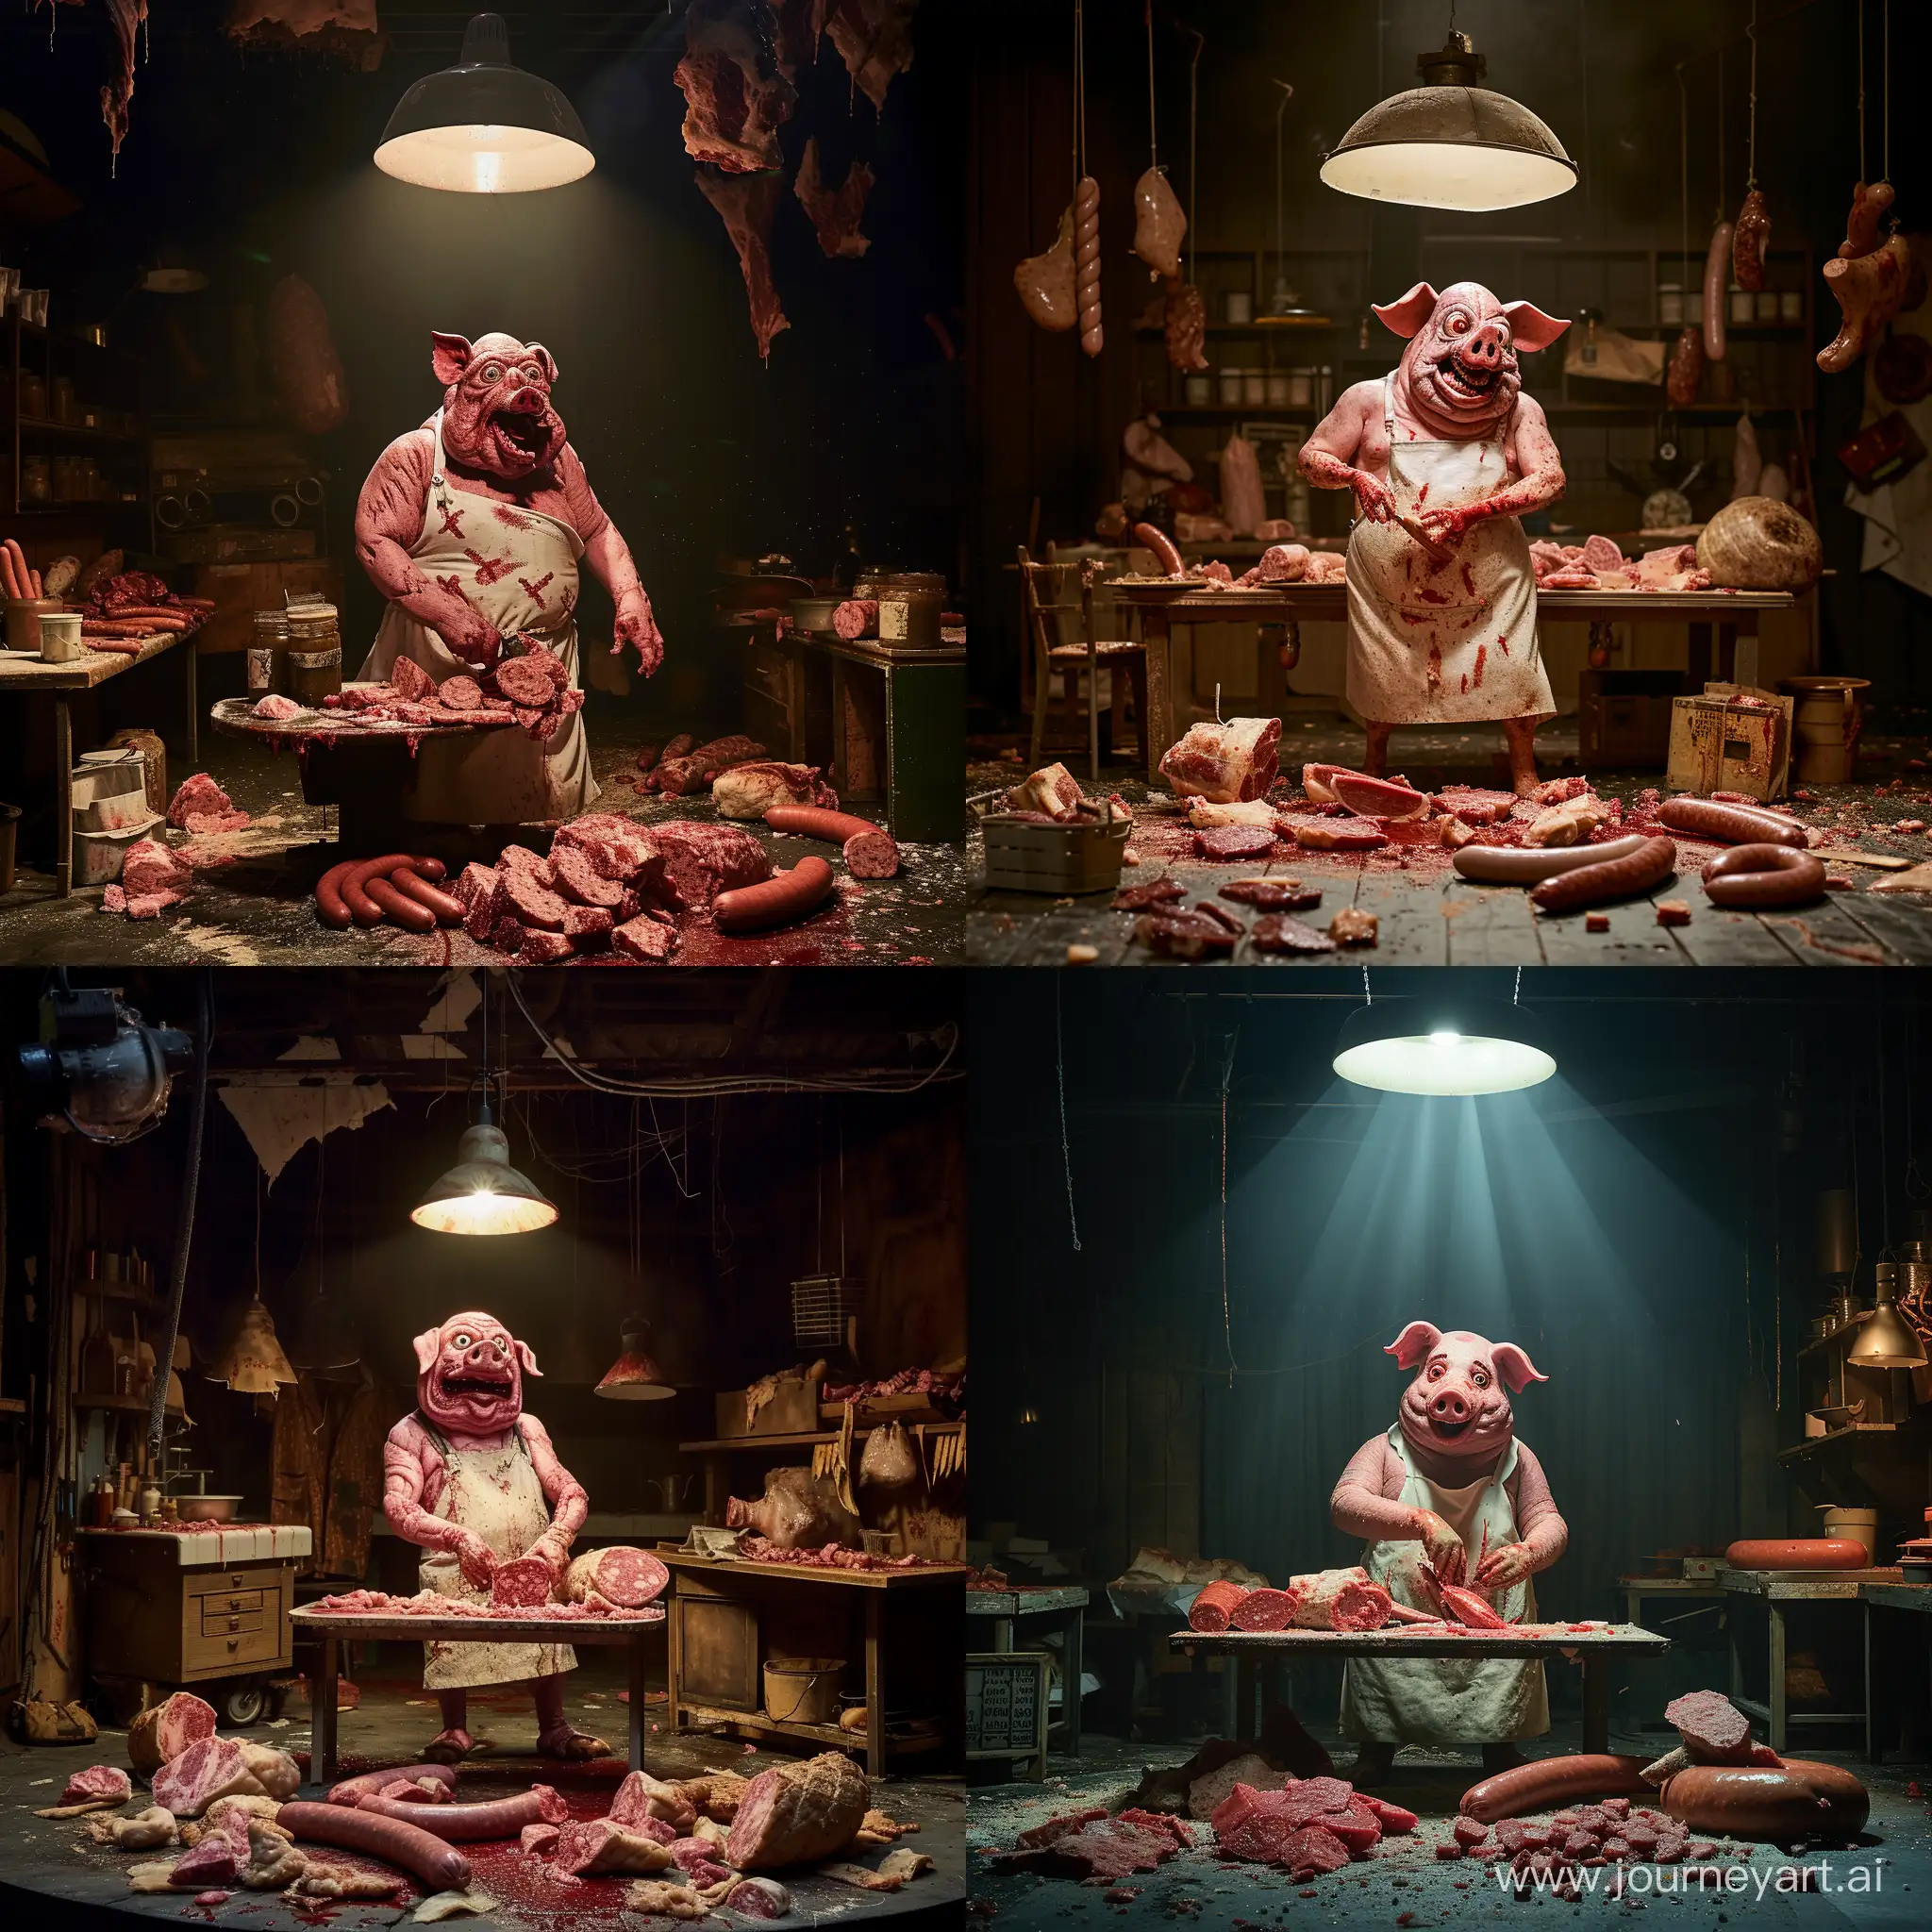 create an image of a scene in a butcher's shop, it is dark but we see many pieces of meat and sausages everywhere and on the floor. In the middle of the stage, lit by a ceiling light, a pink and fat humanoid pig wearing a white butcher's apron with red marks. He is standing in front of a table, his crazy face is marked with big eyes, he is drooling. He cuts slices from a very large sausage. Horrific scene.